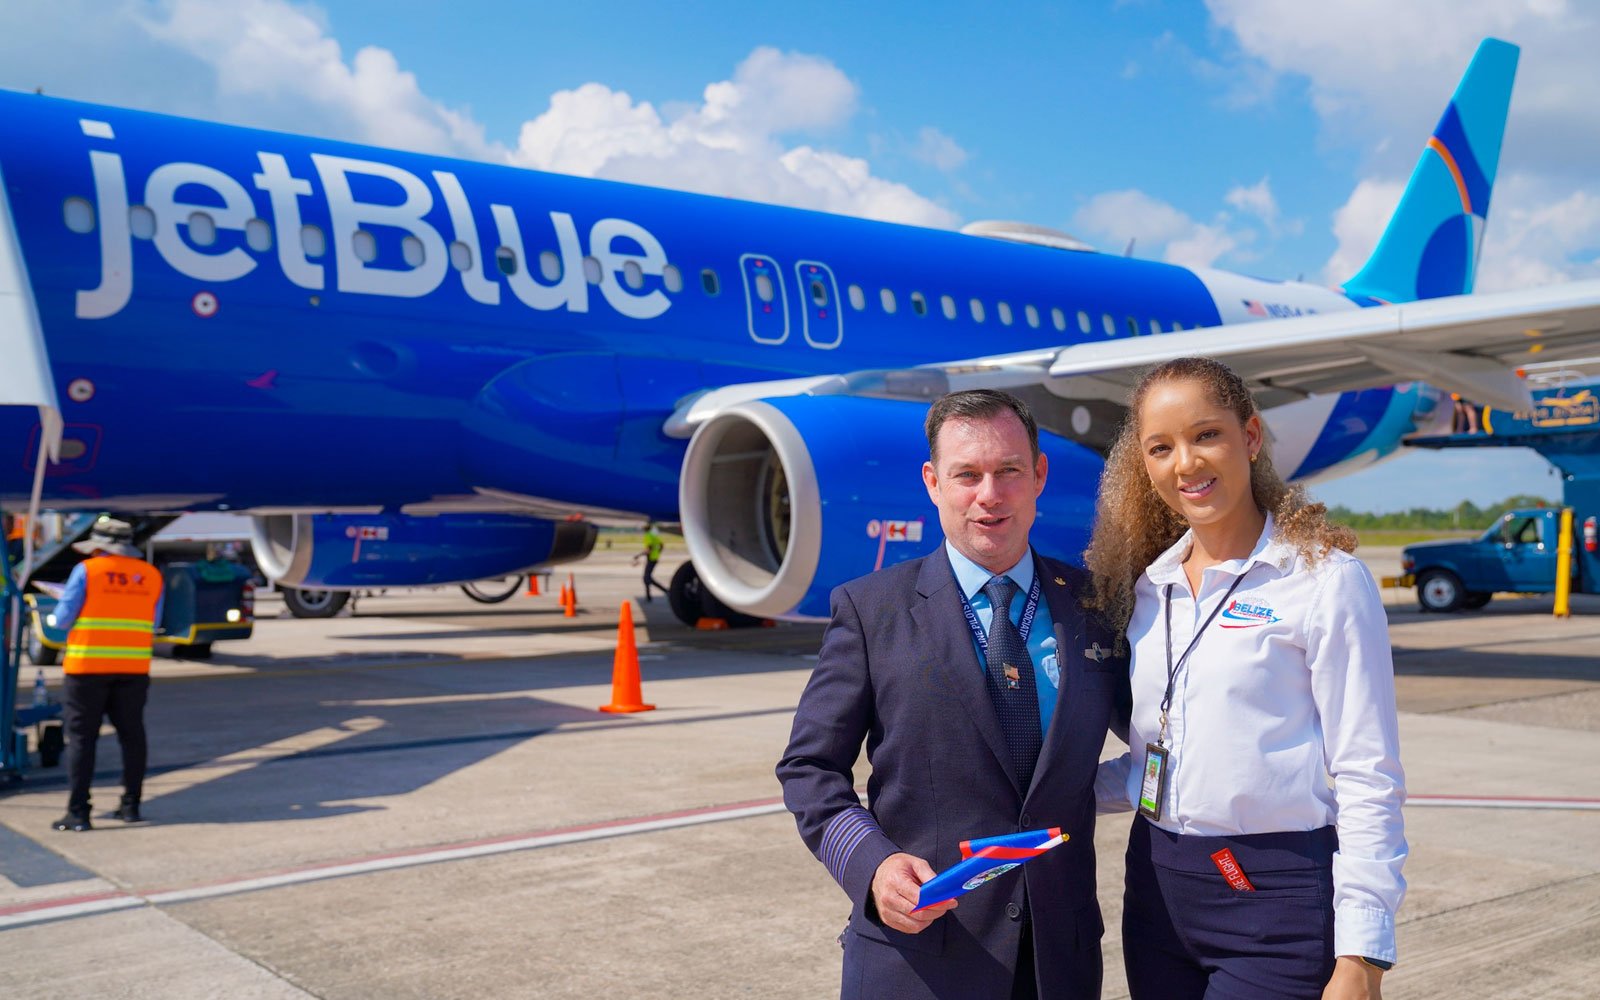 JetBlue Direct Flight from New York to Belize